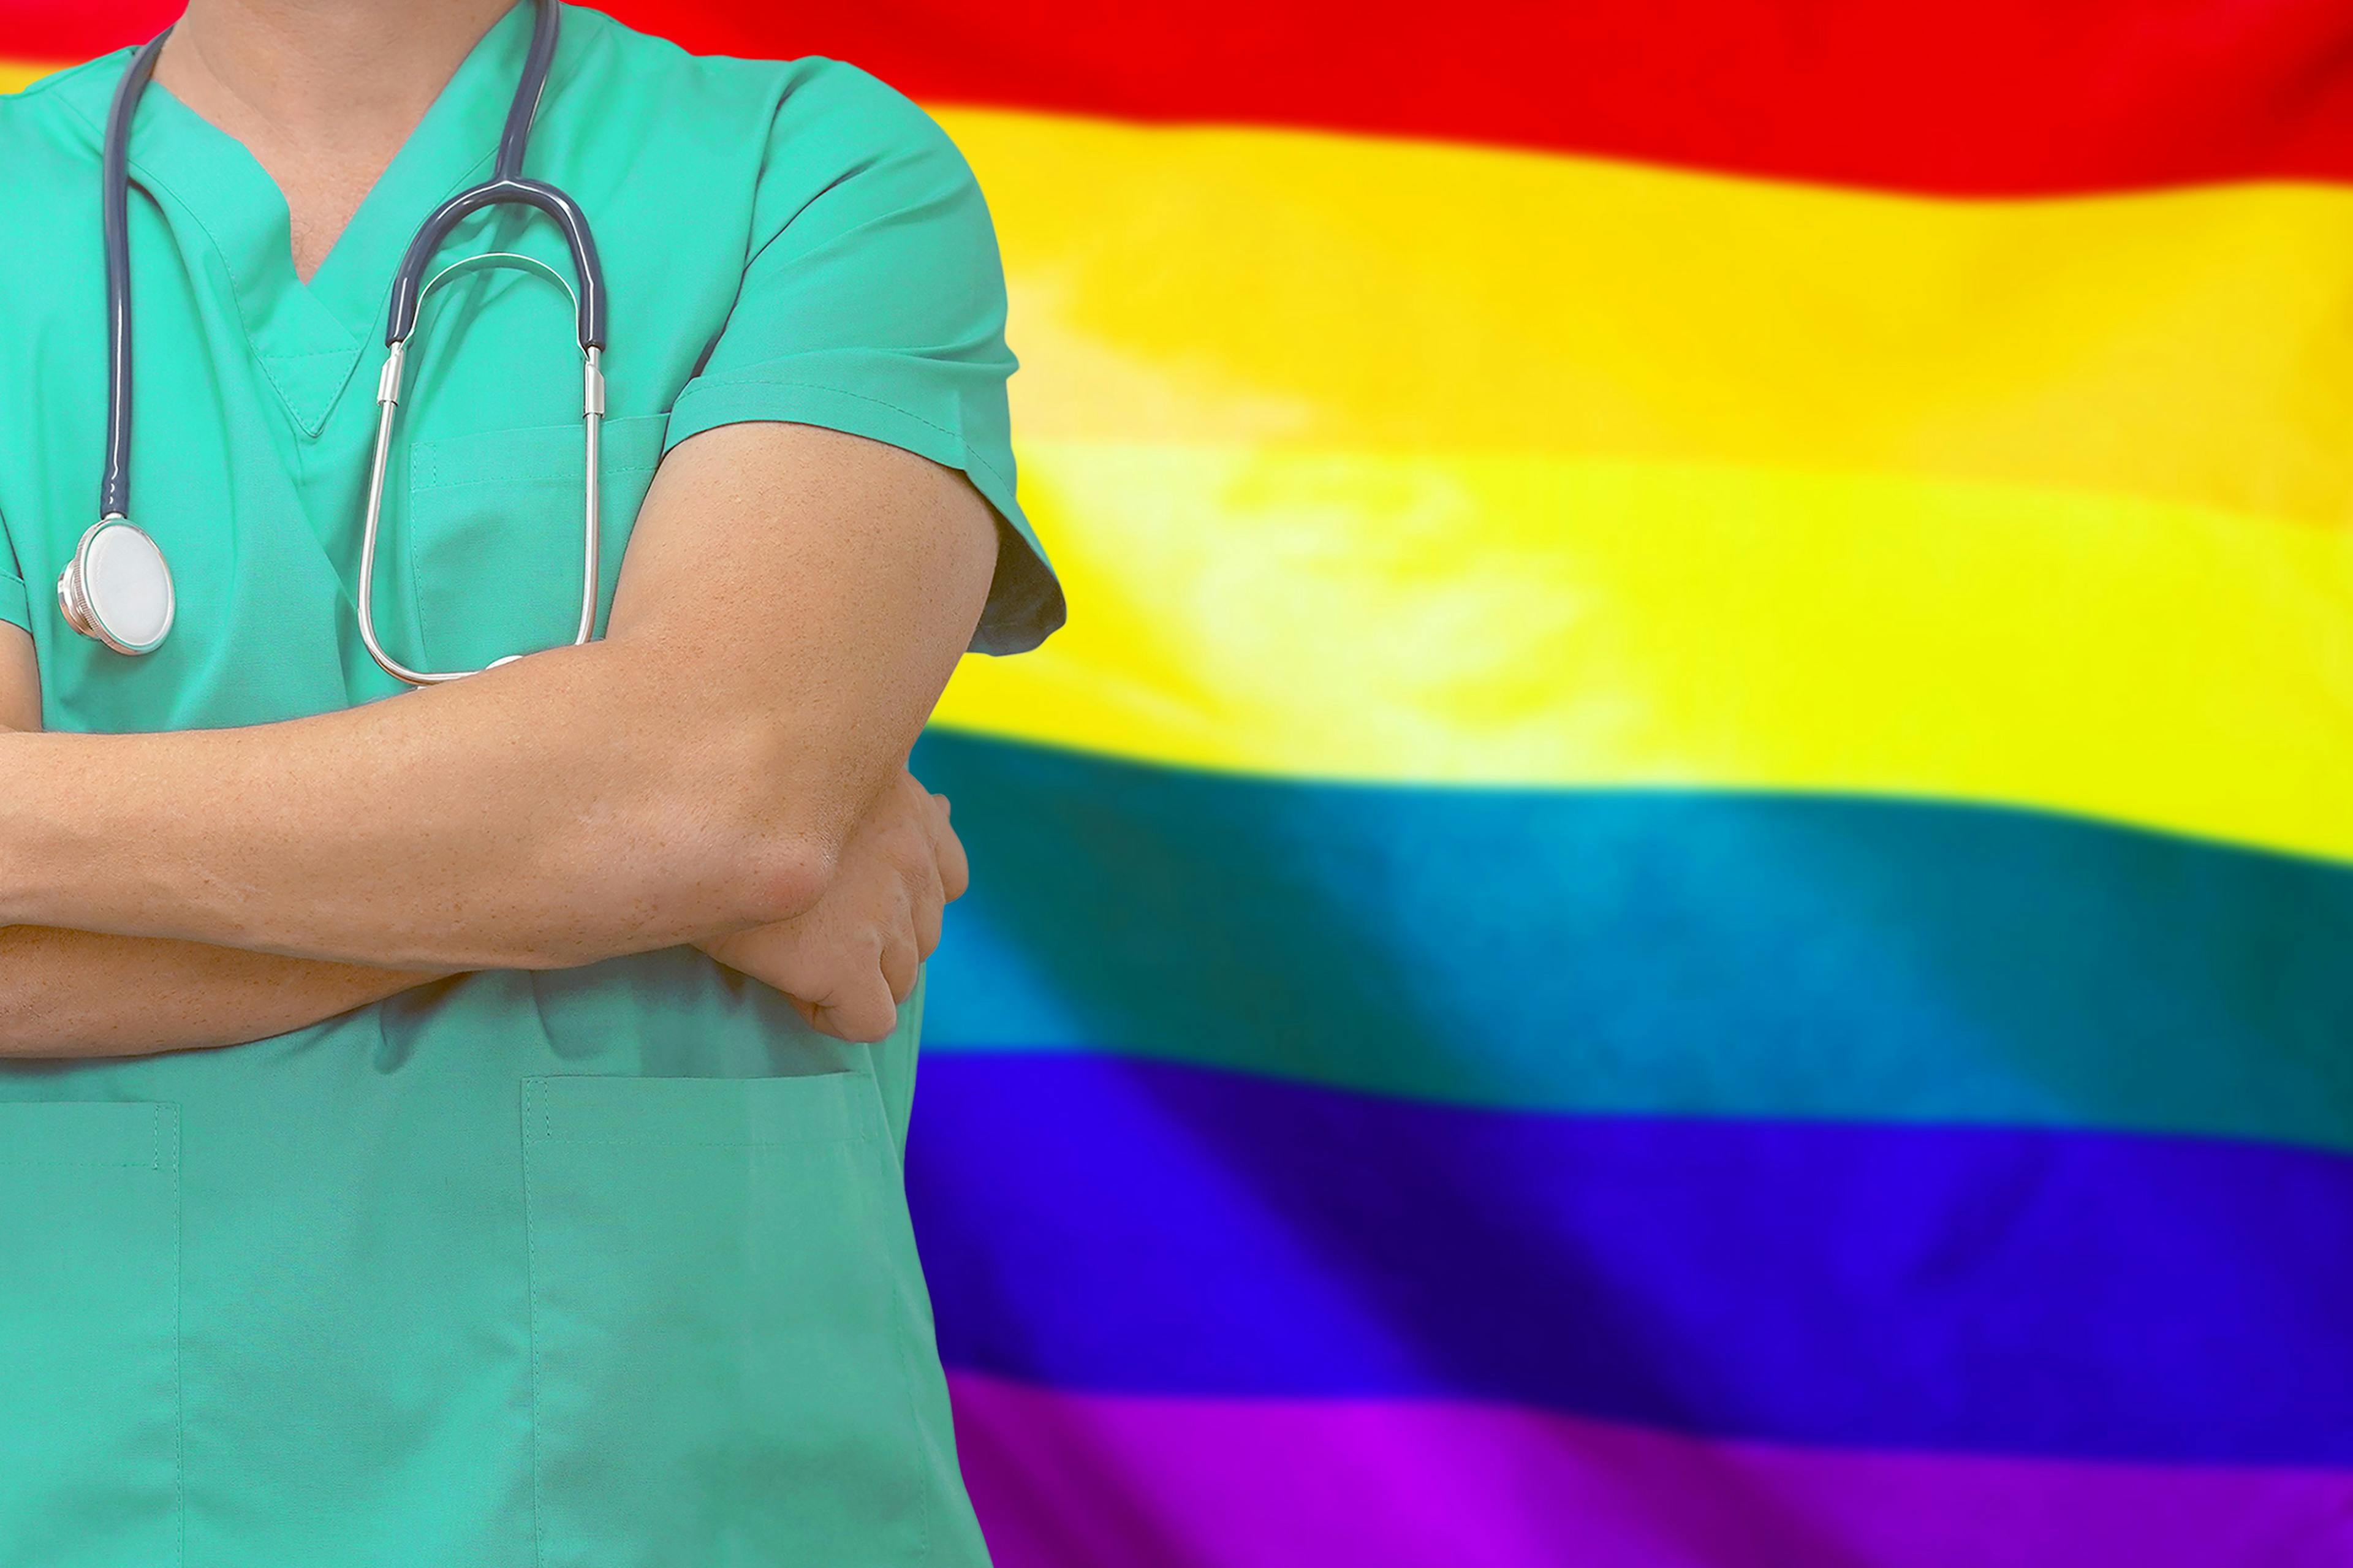 Healthgrades, OutCare Health team to help LGBTQ+ patients find providers